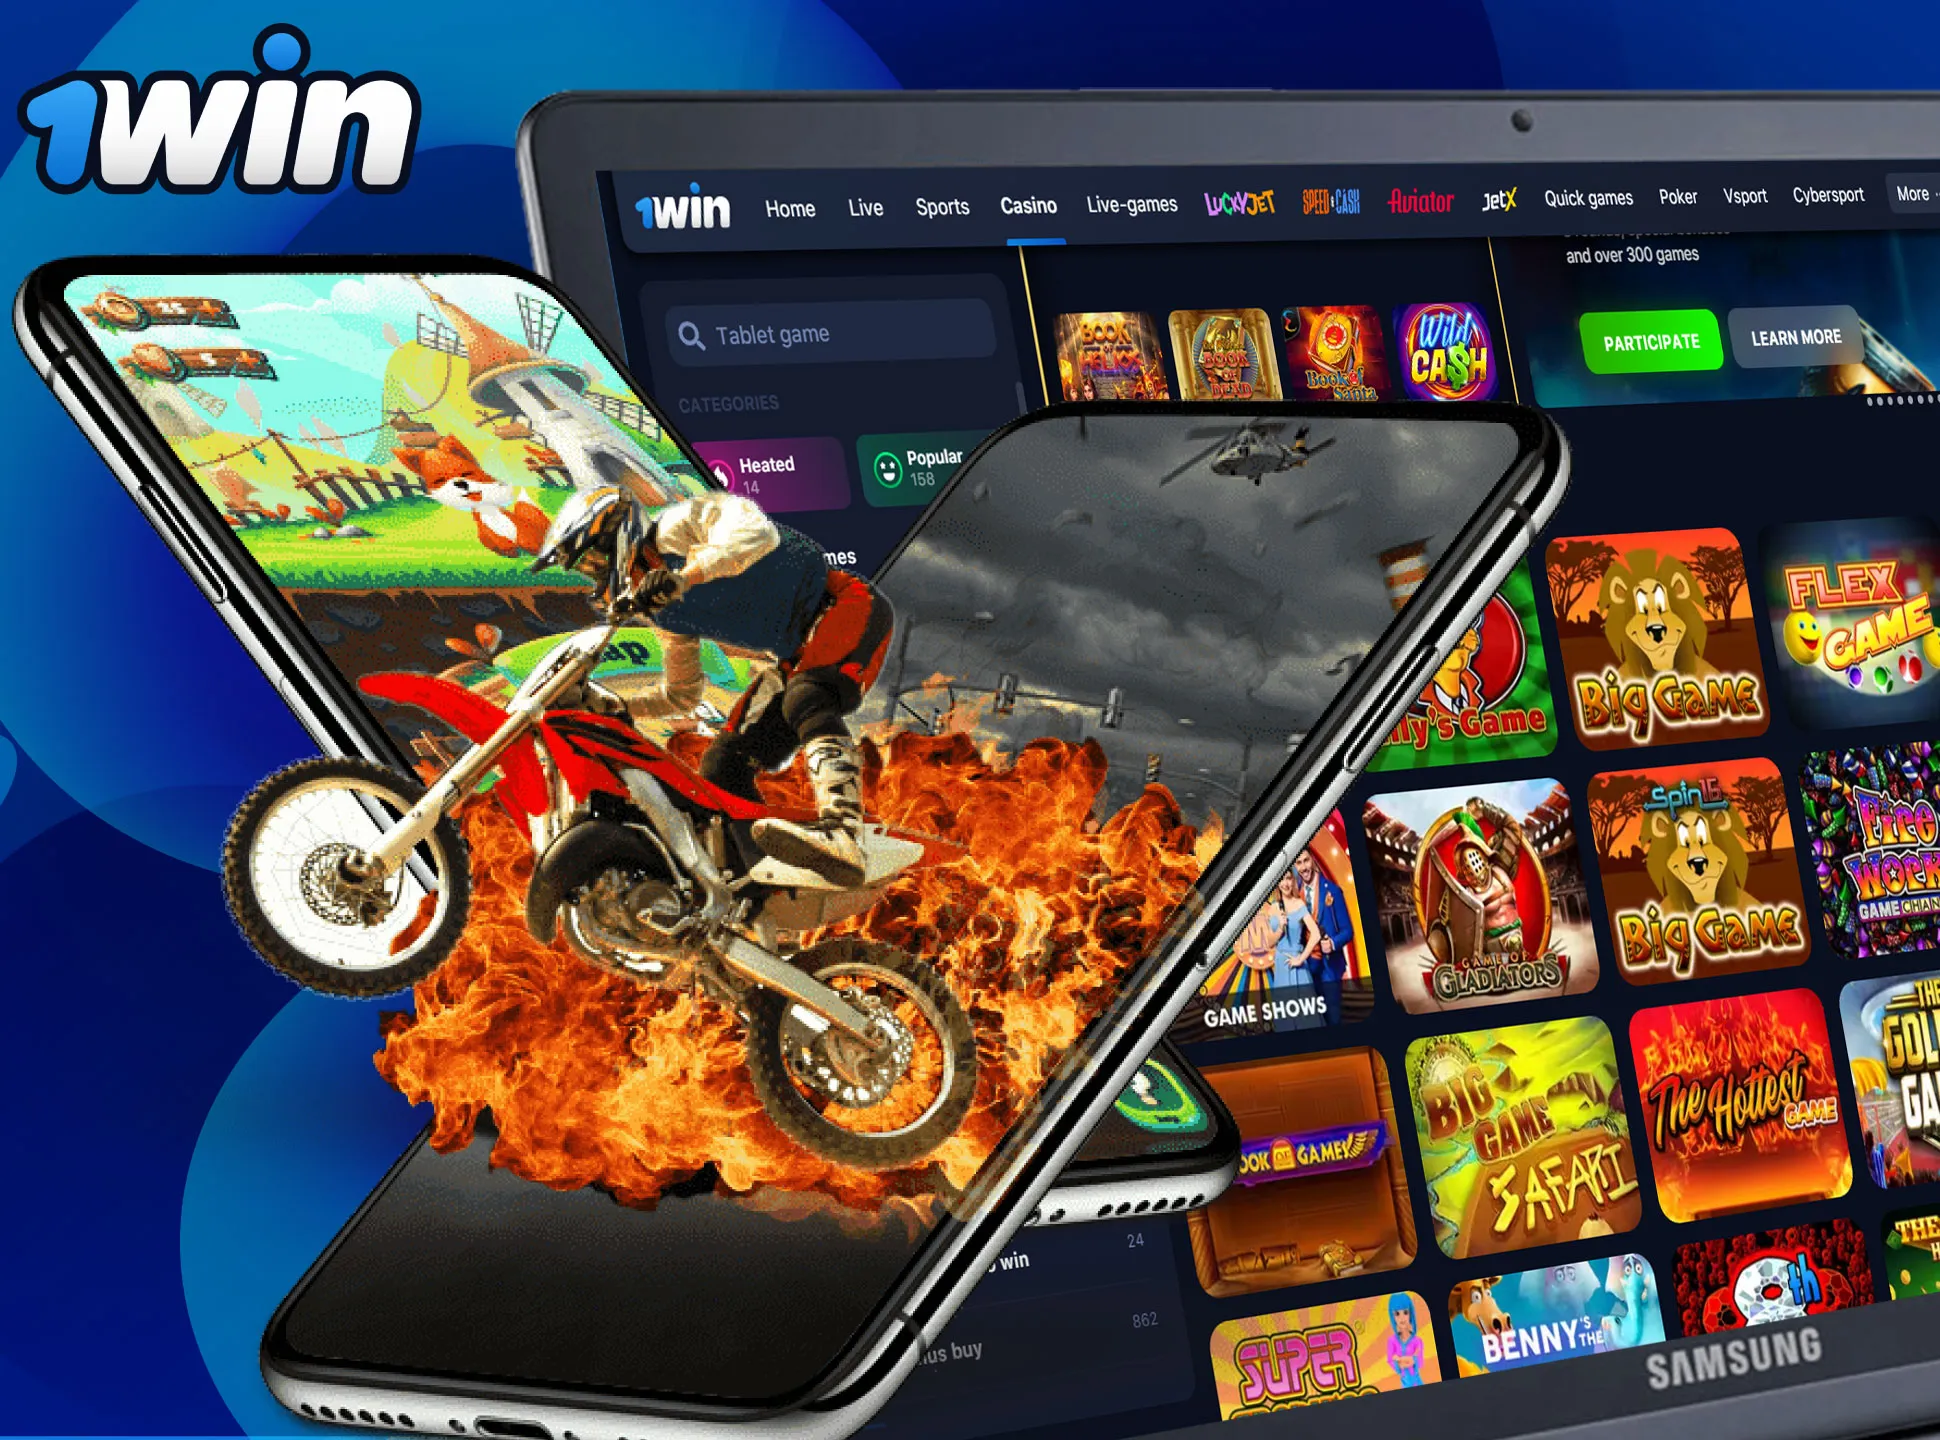 Play poker, blackjack, baccarat and other board games in the 1win online casino.